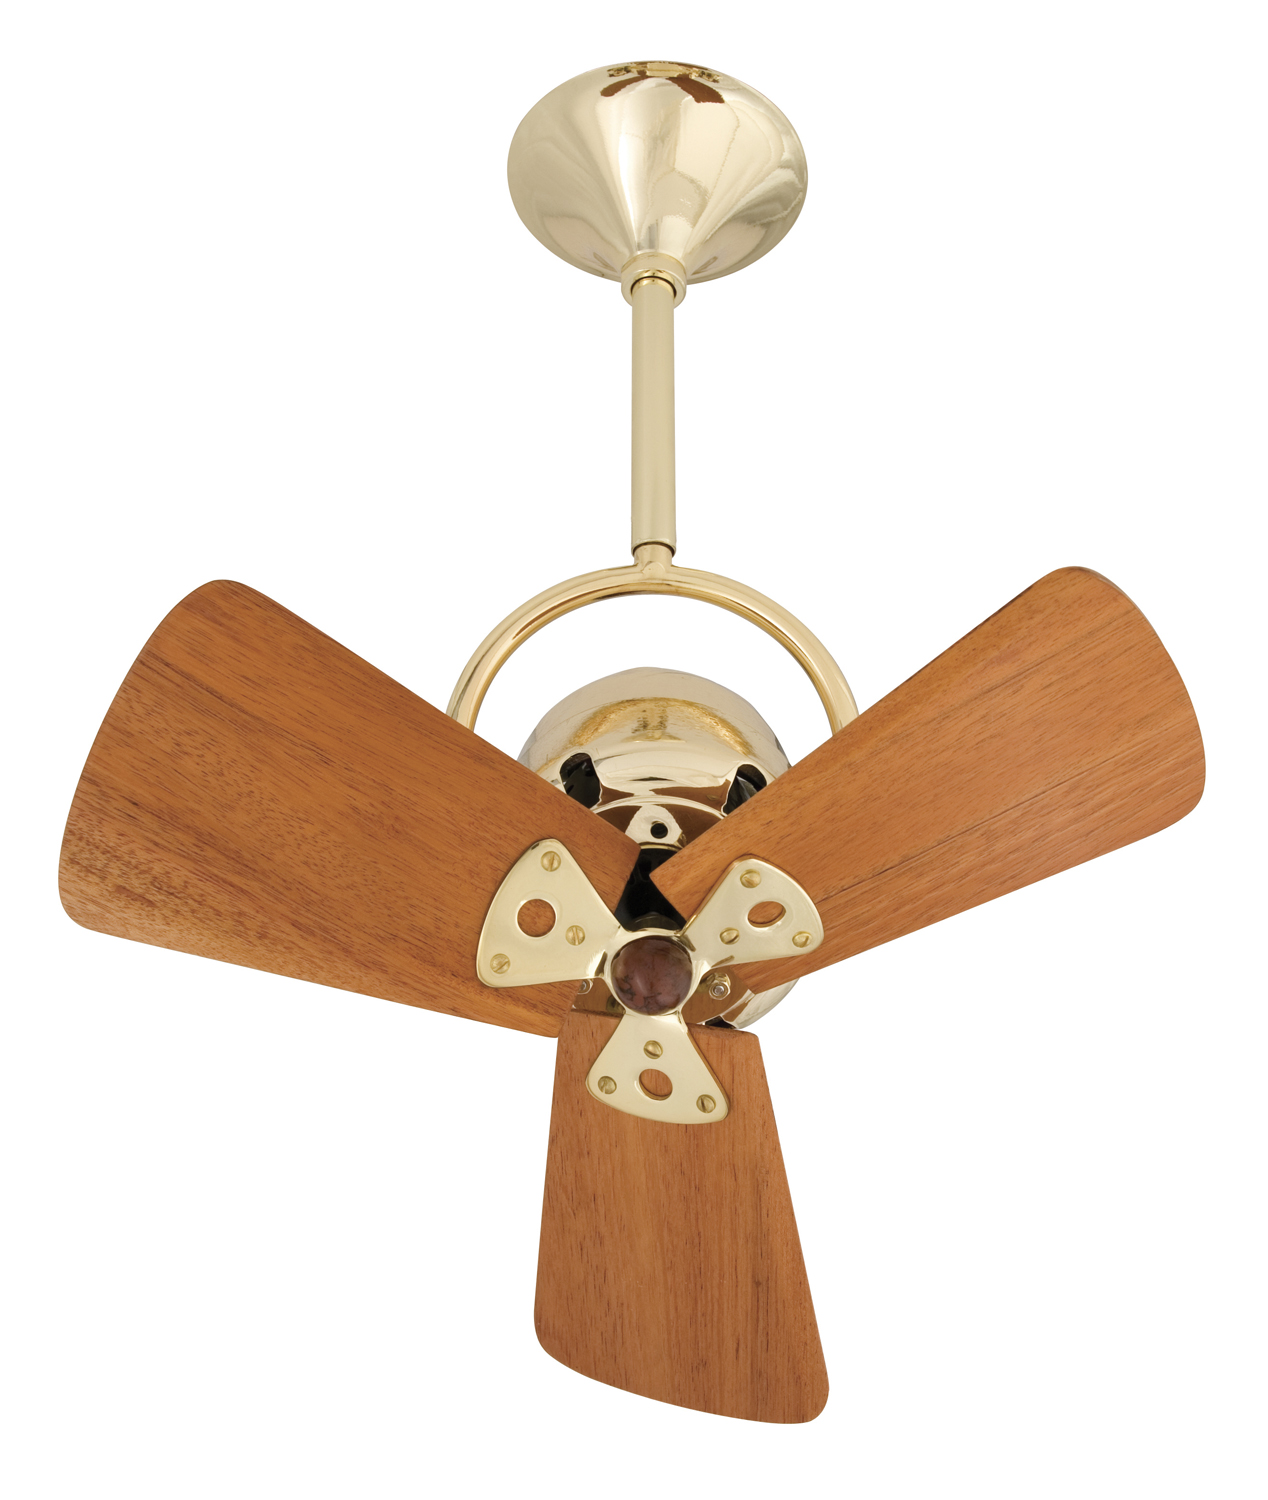 Bianca Direcional ceiling fan in Brushed Brass with Mahogany wood blades made by Matthews Fan Company.